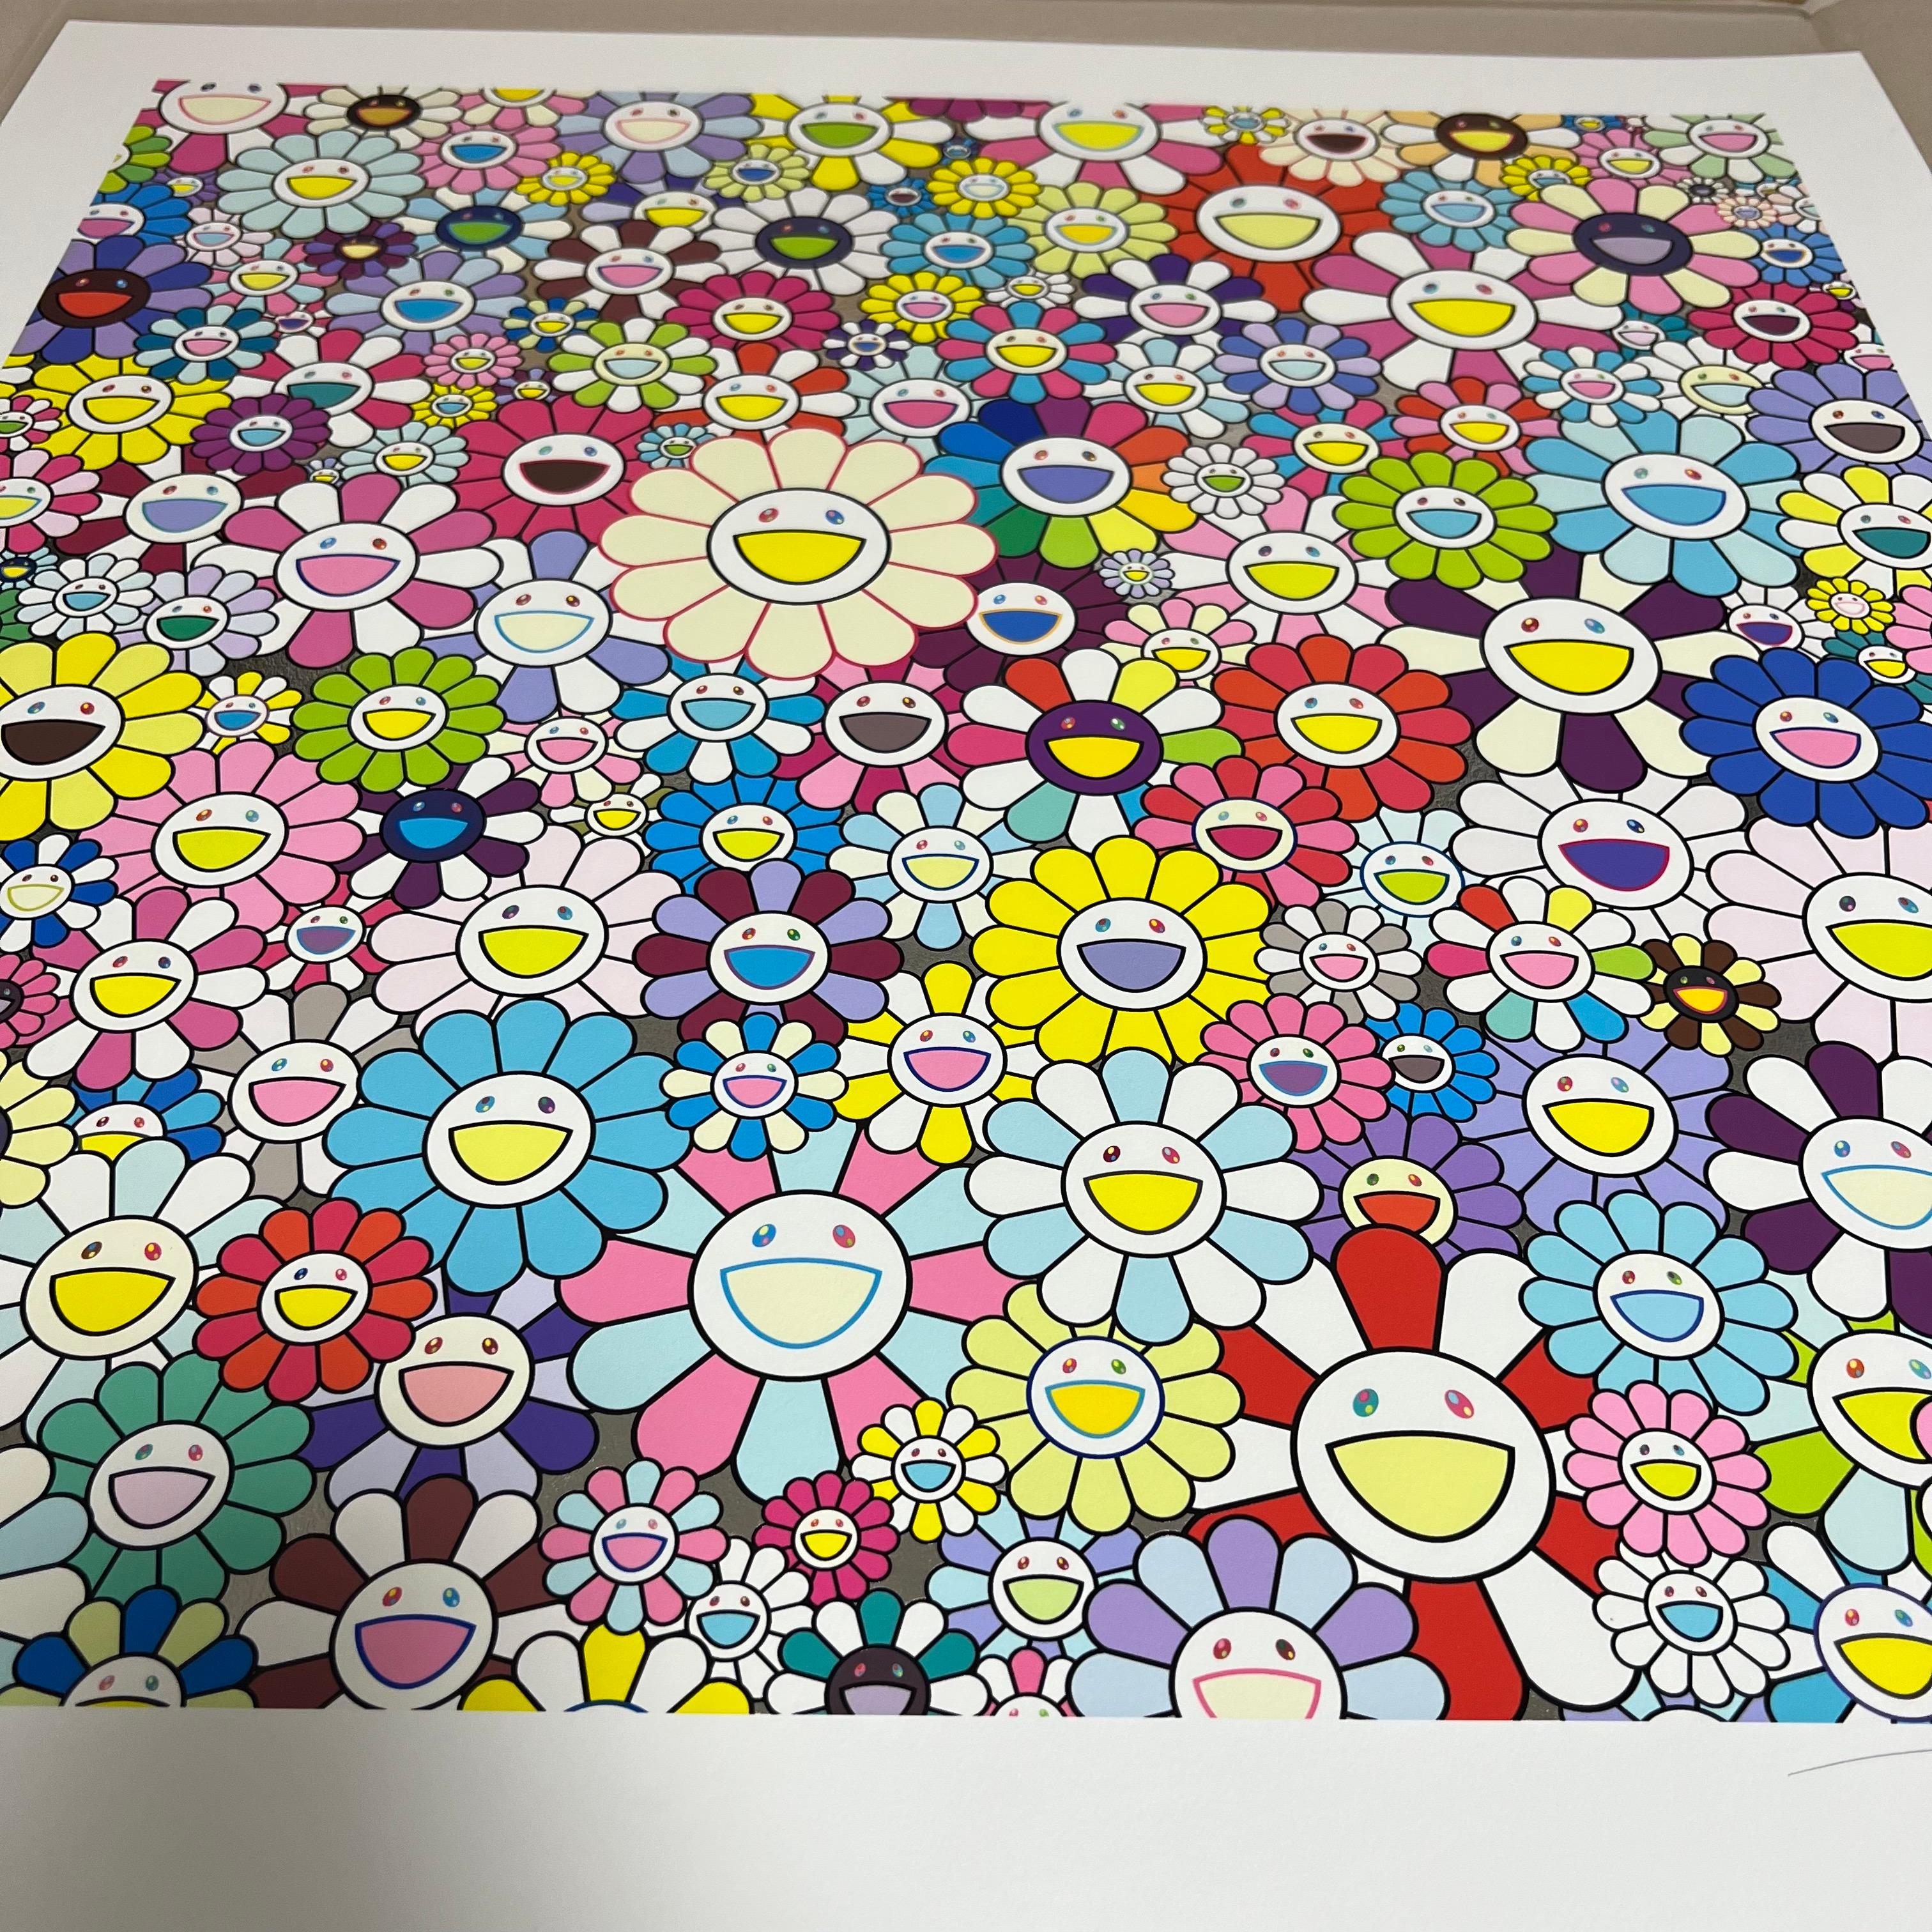 Artist: Takashi Murakami
Title: Heaven's Gate
Year: 2022
Edition: 100
Size: 750 x 750mm (sheet size)
Medium: Archival Pigment Print + Silkscreen with platinum leaf

Takashi Murakami has handwritten the edition number and signature on each piece of